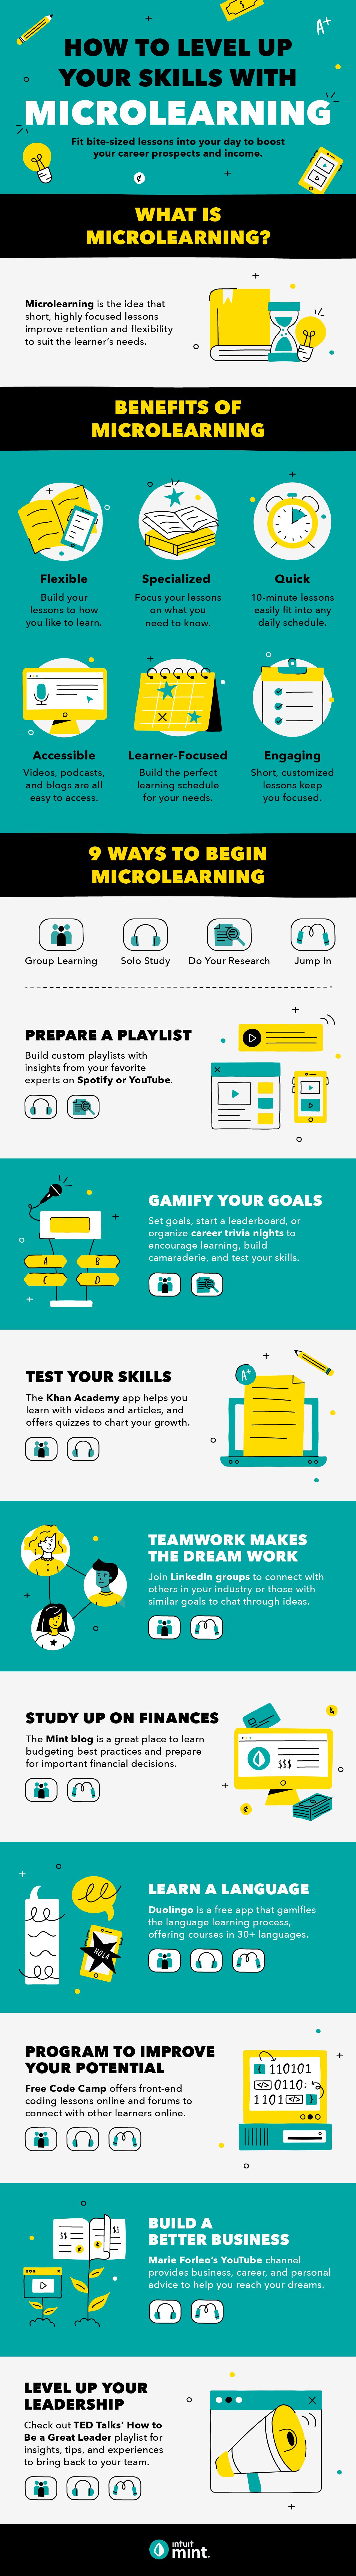 infographic on microlearning techniques and benefits